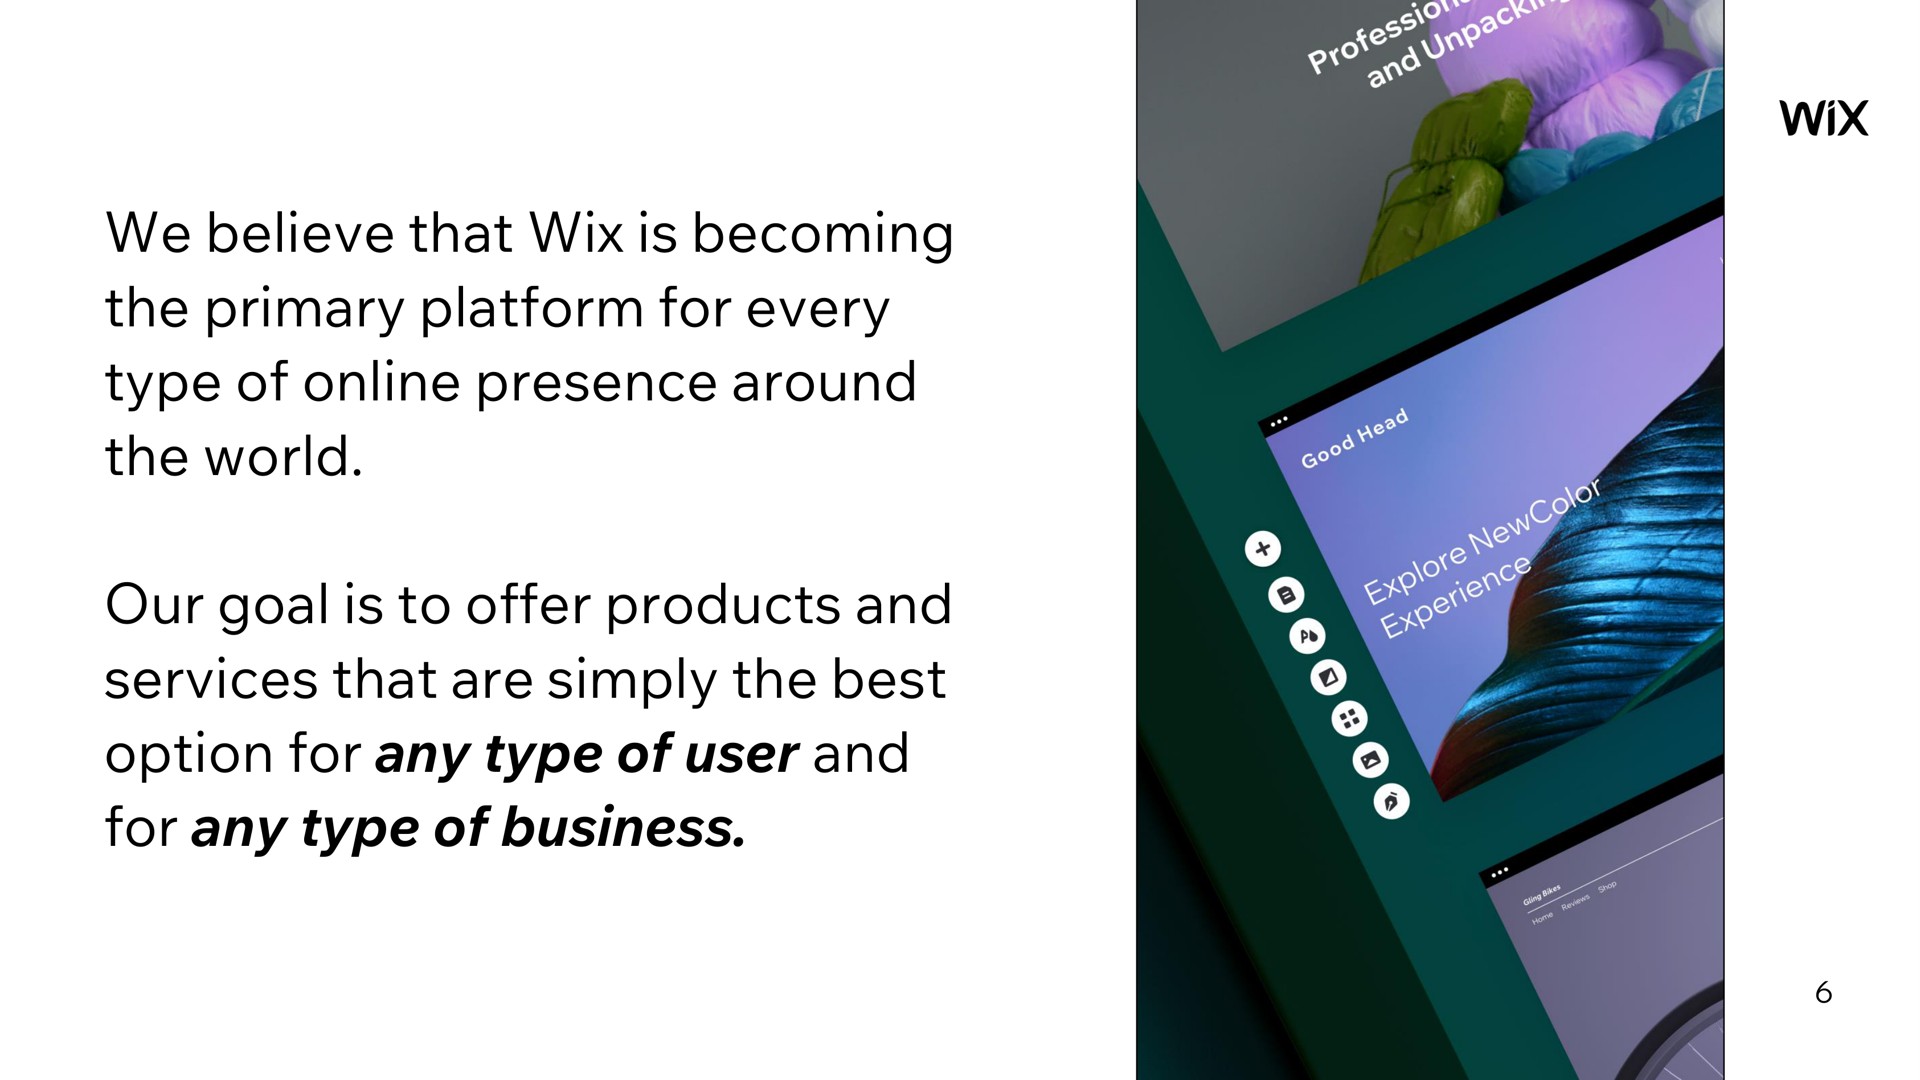 we believe that is becoming the primary platform for every type of presence around the world our goal is to offer products and services that are simply the best option for any type of user and for any type of business | Wix